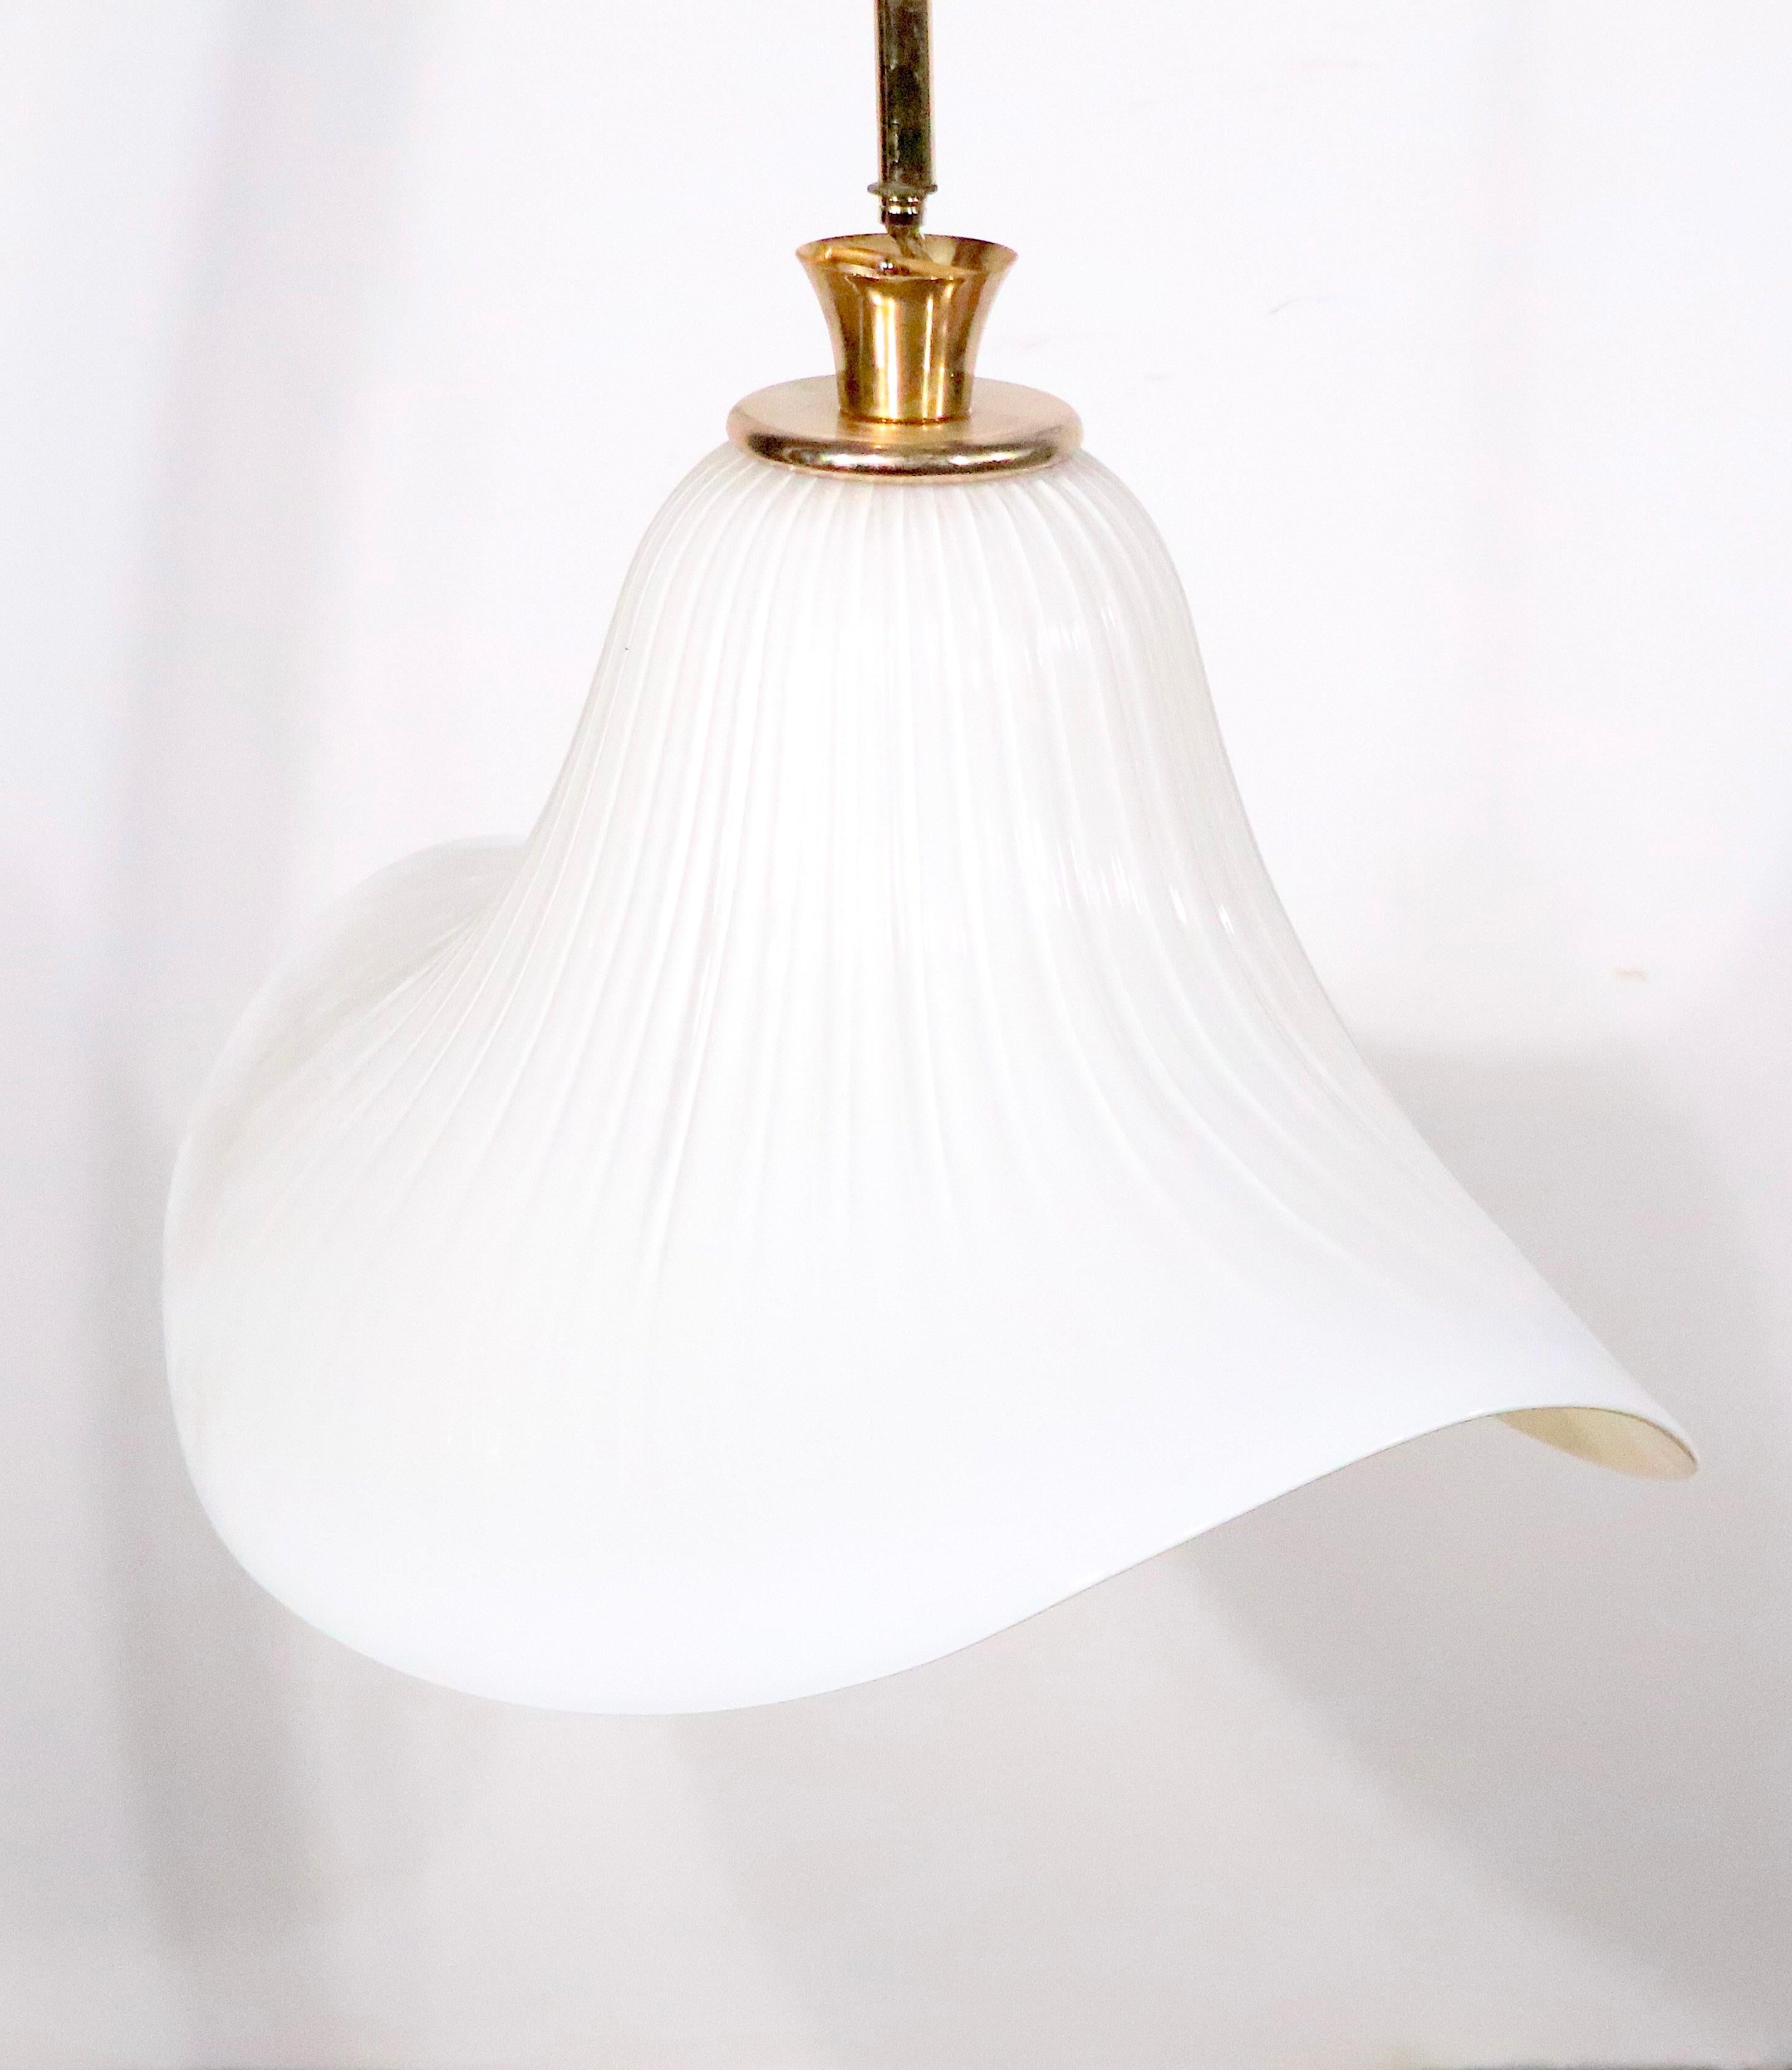 Glamorous high style Murano glass chandelier, circa 1970/1980's. The bell, or hat, shaped glass shade is supported by its original brass vertical post. The shade is in off white color, with a ribbed textured exterior.  The fixture is in working, 